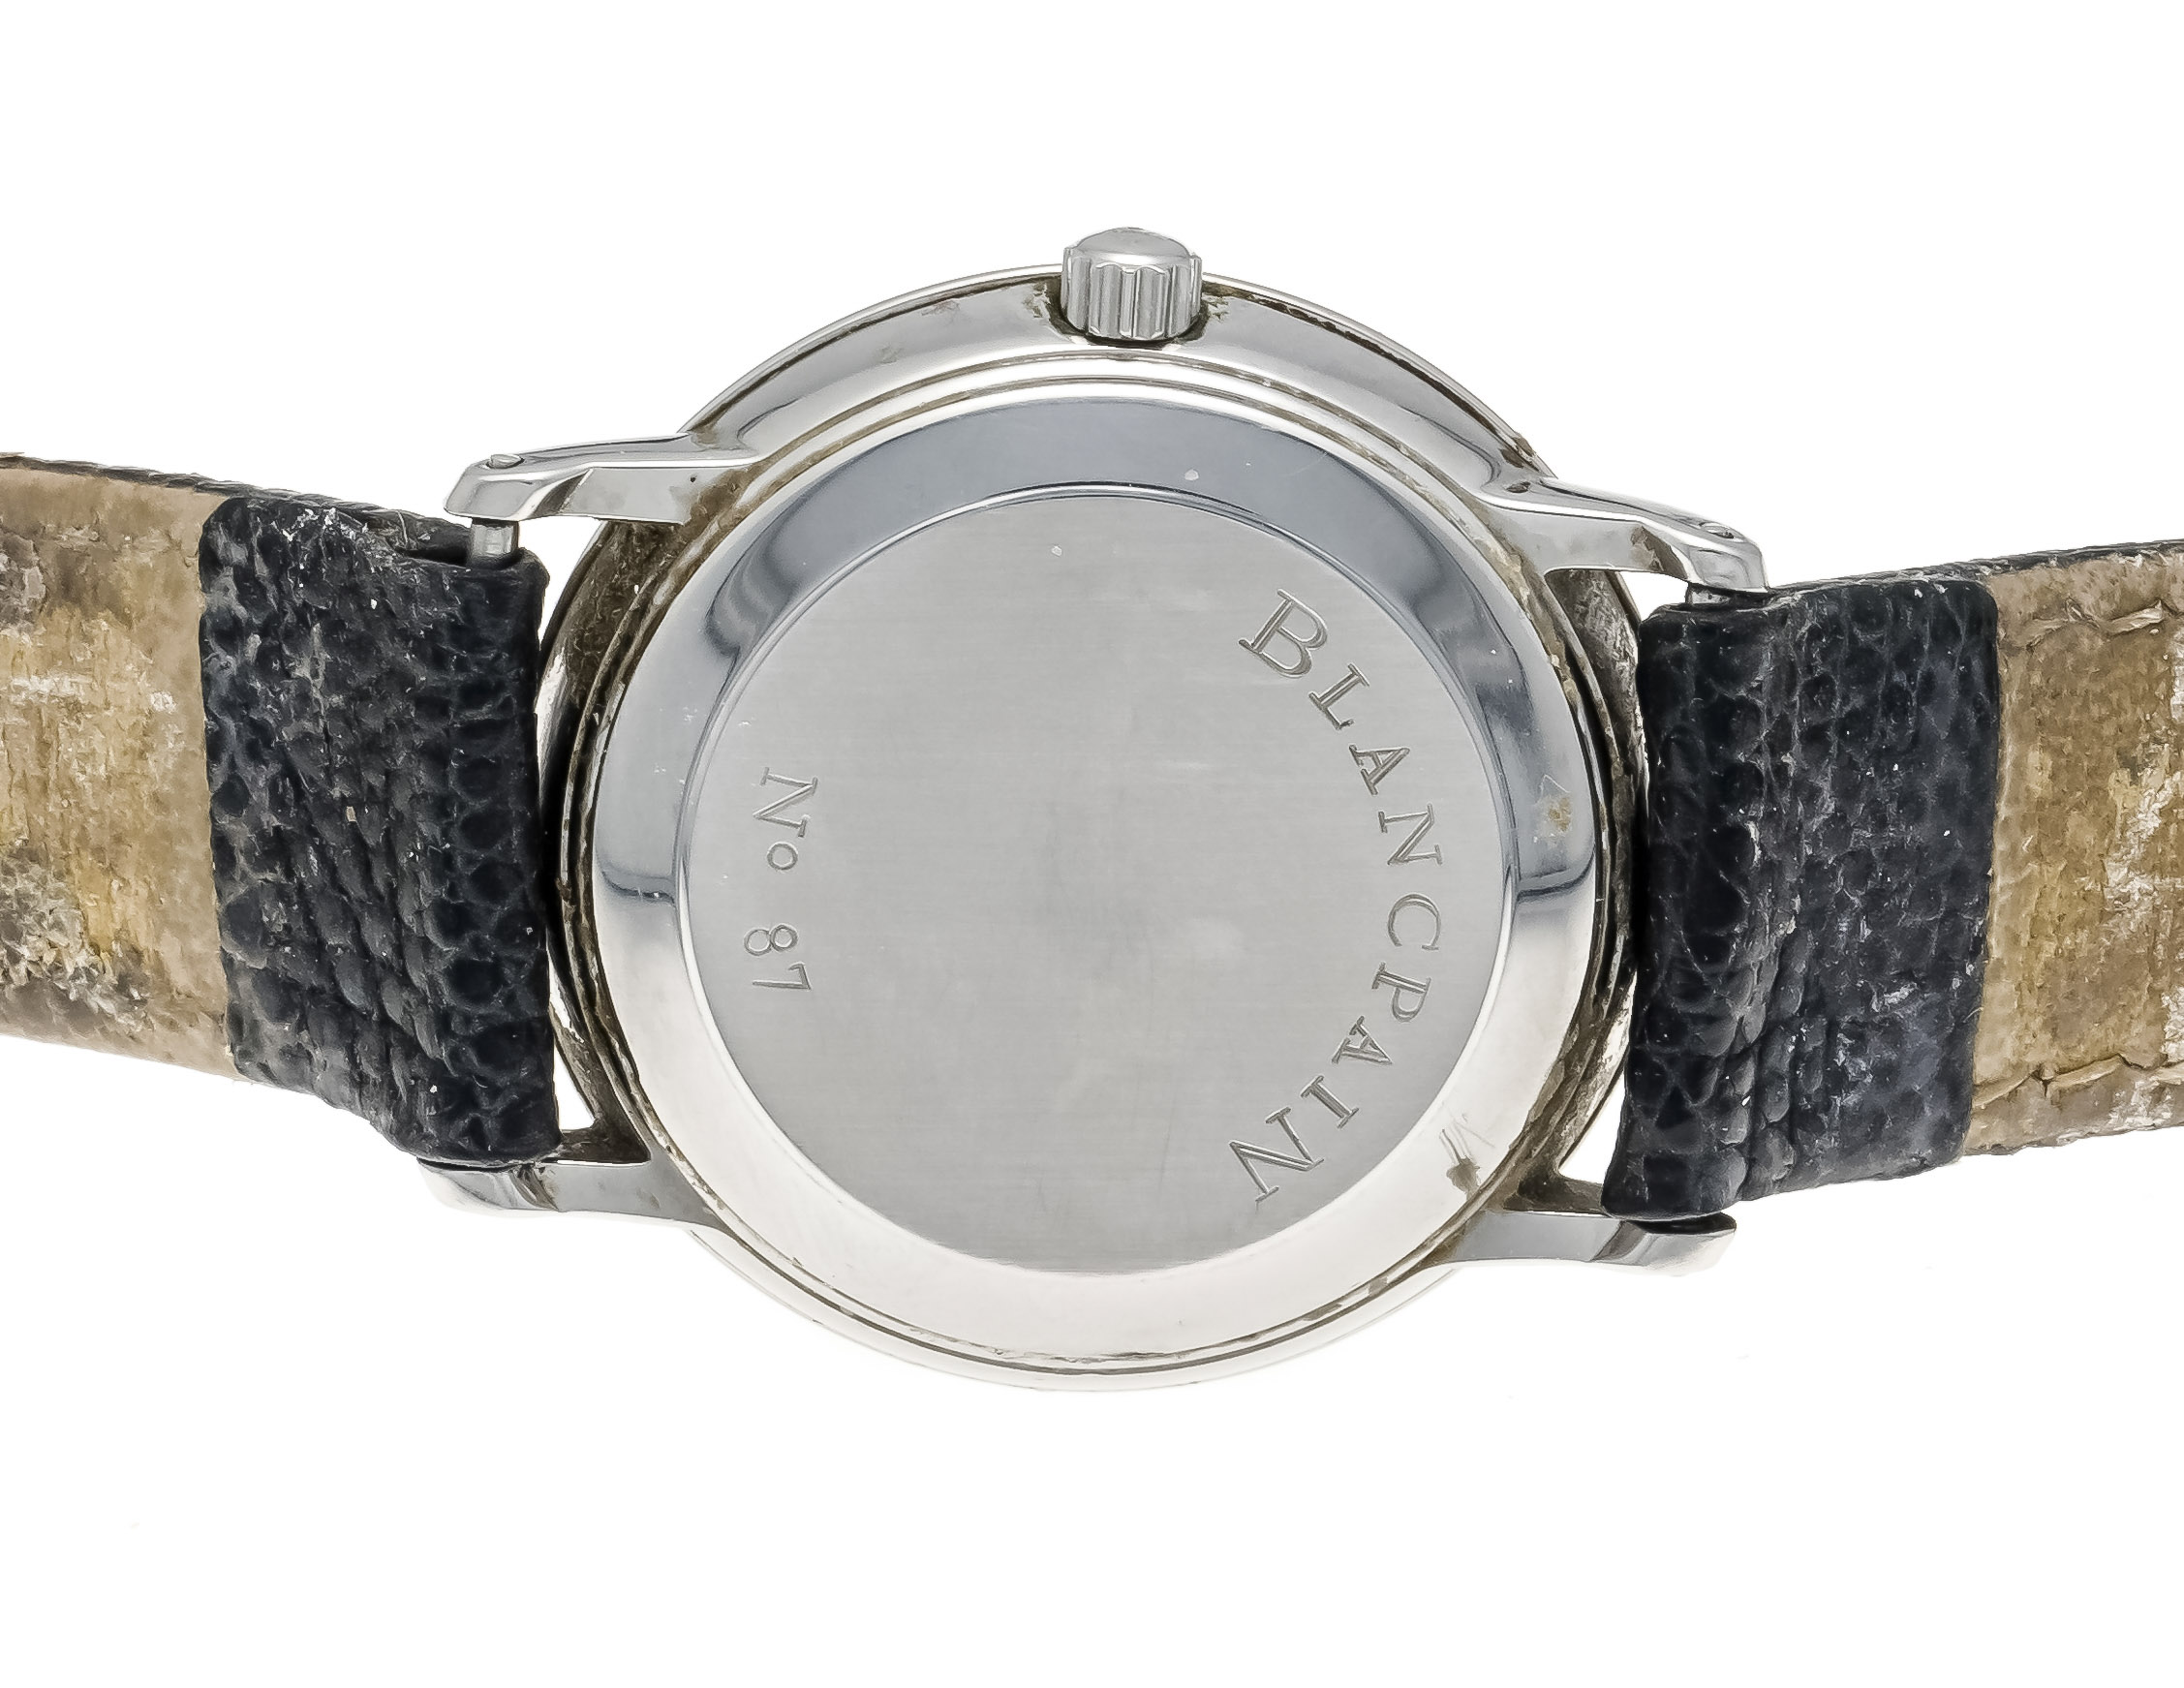 Blancpain, Villeret, men's watch, automatic, steel, Ref. 1151-1127-11 No. 87, circa 2000, white dial - Image 2 of 2